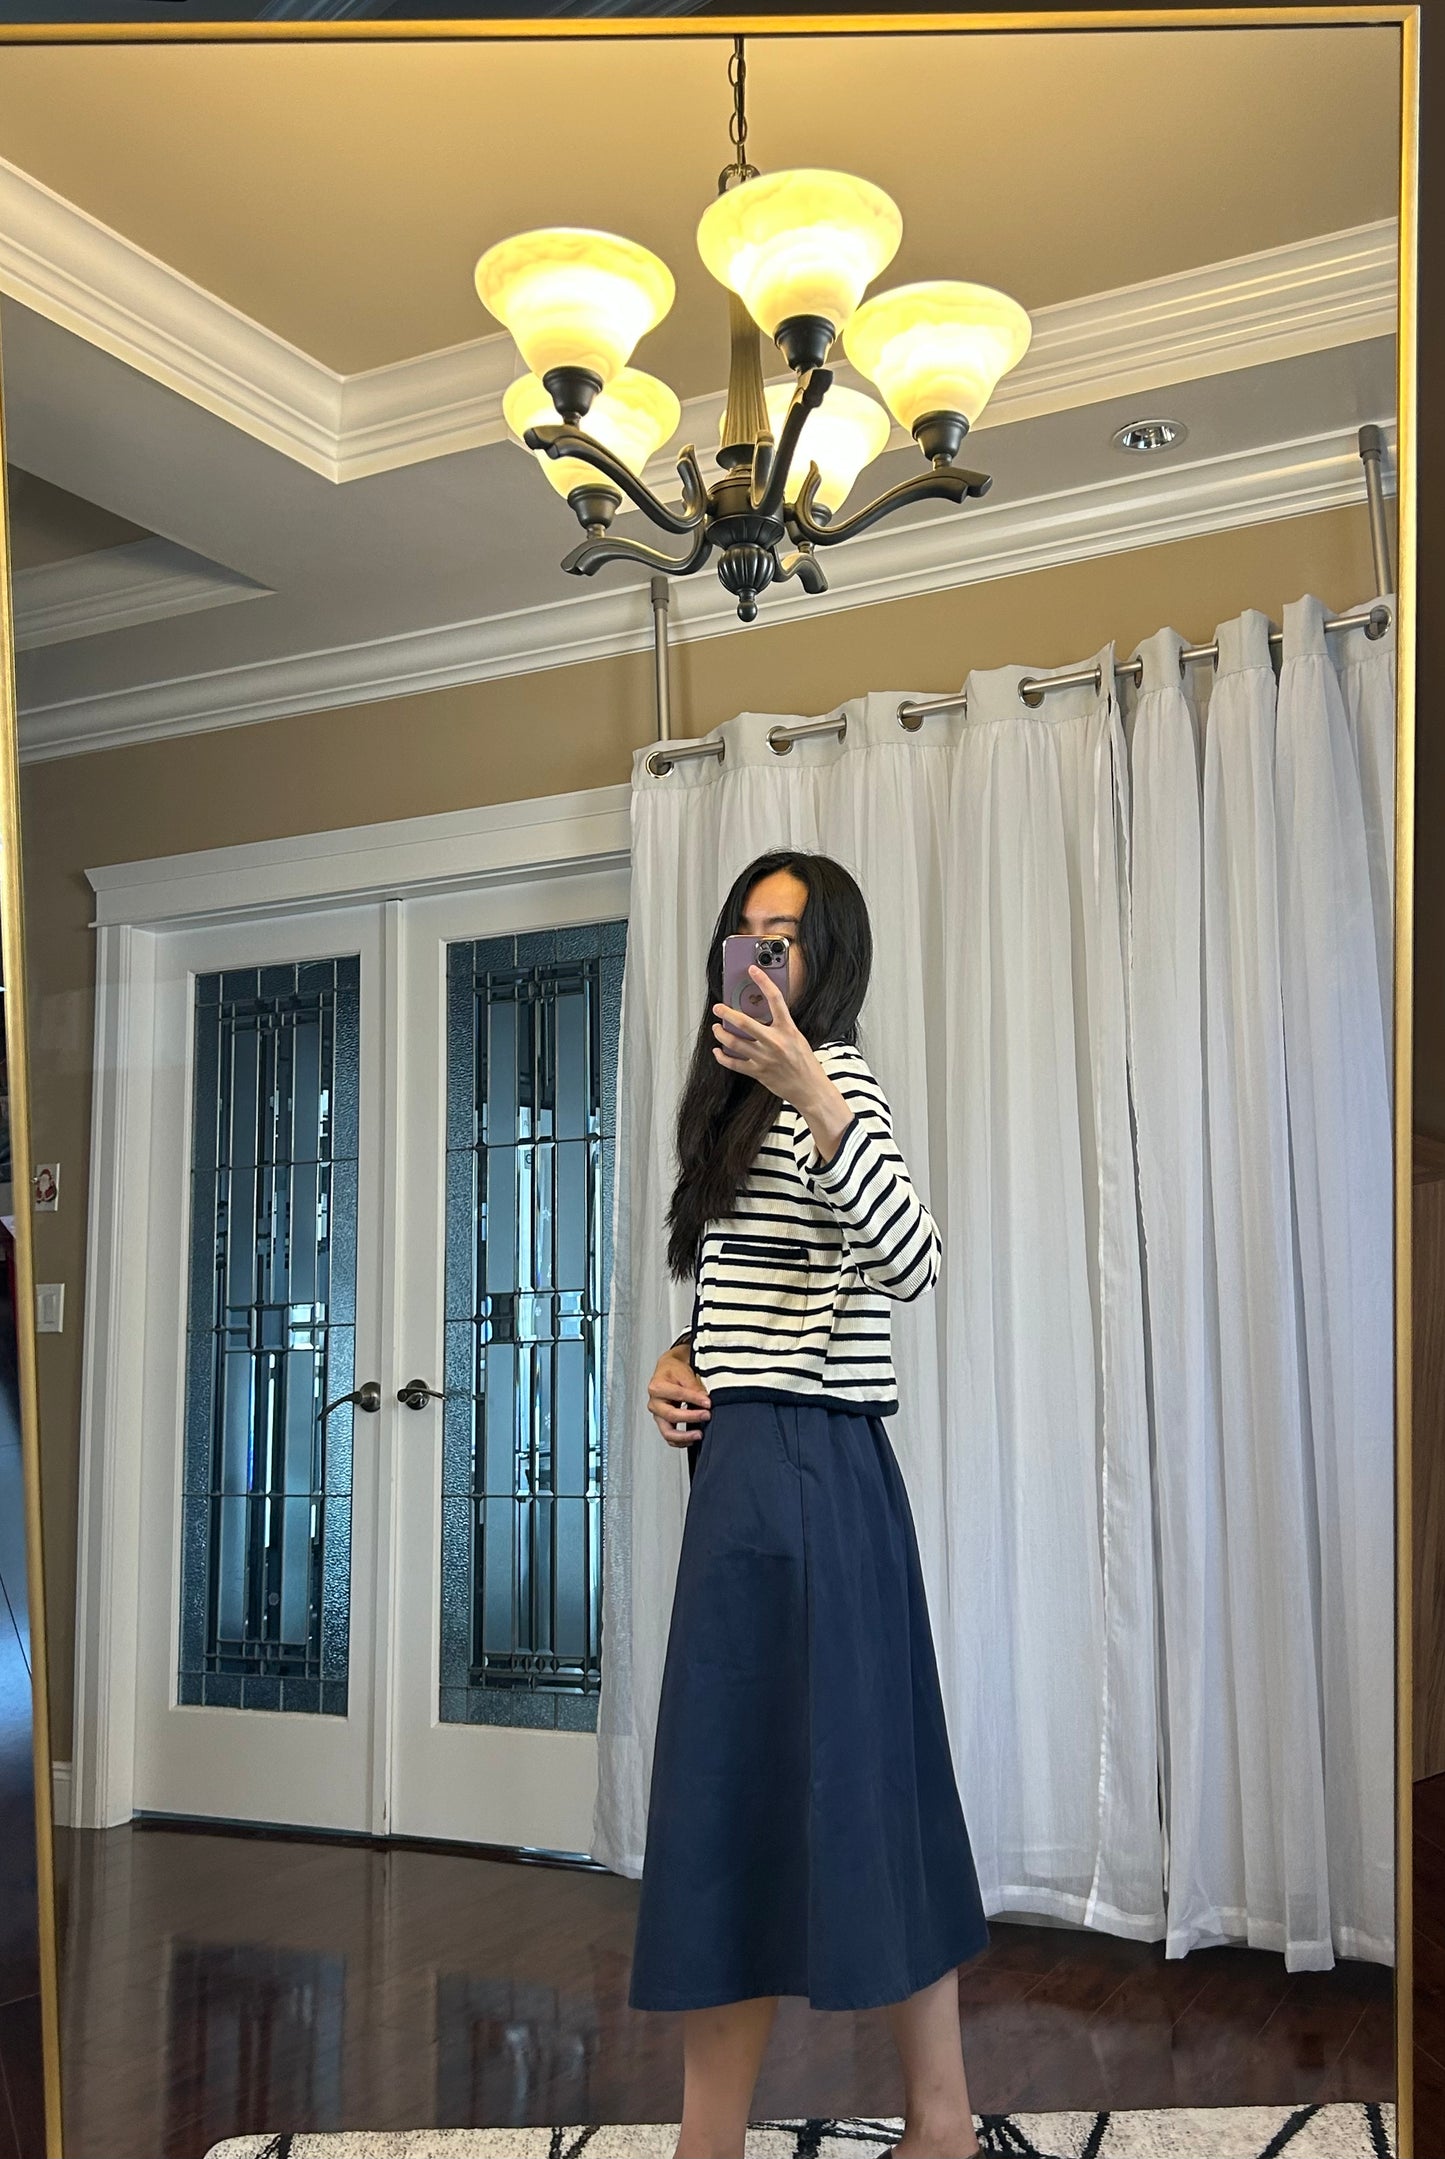 Stripe Shirt with Blue Dress Outfit